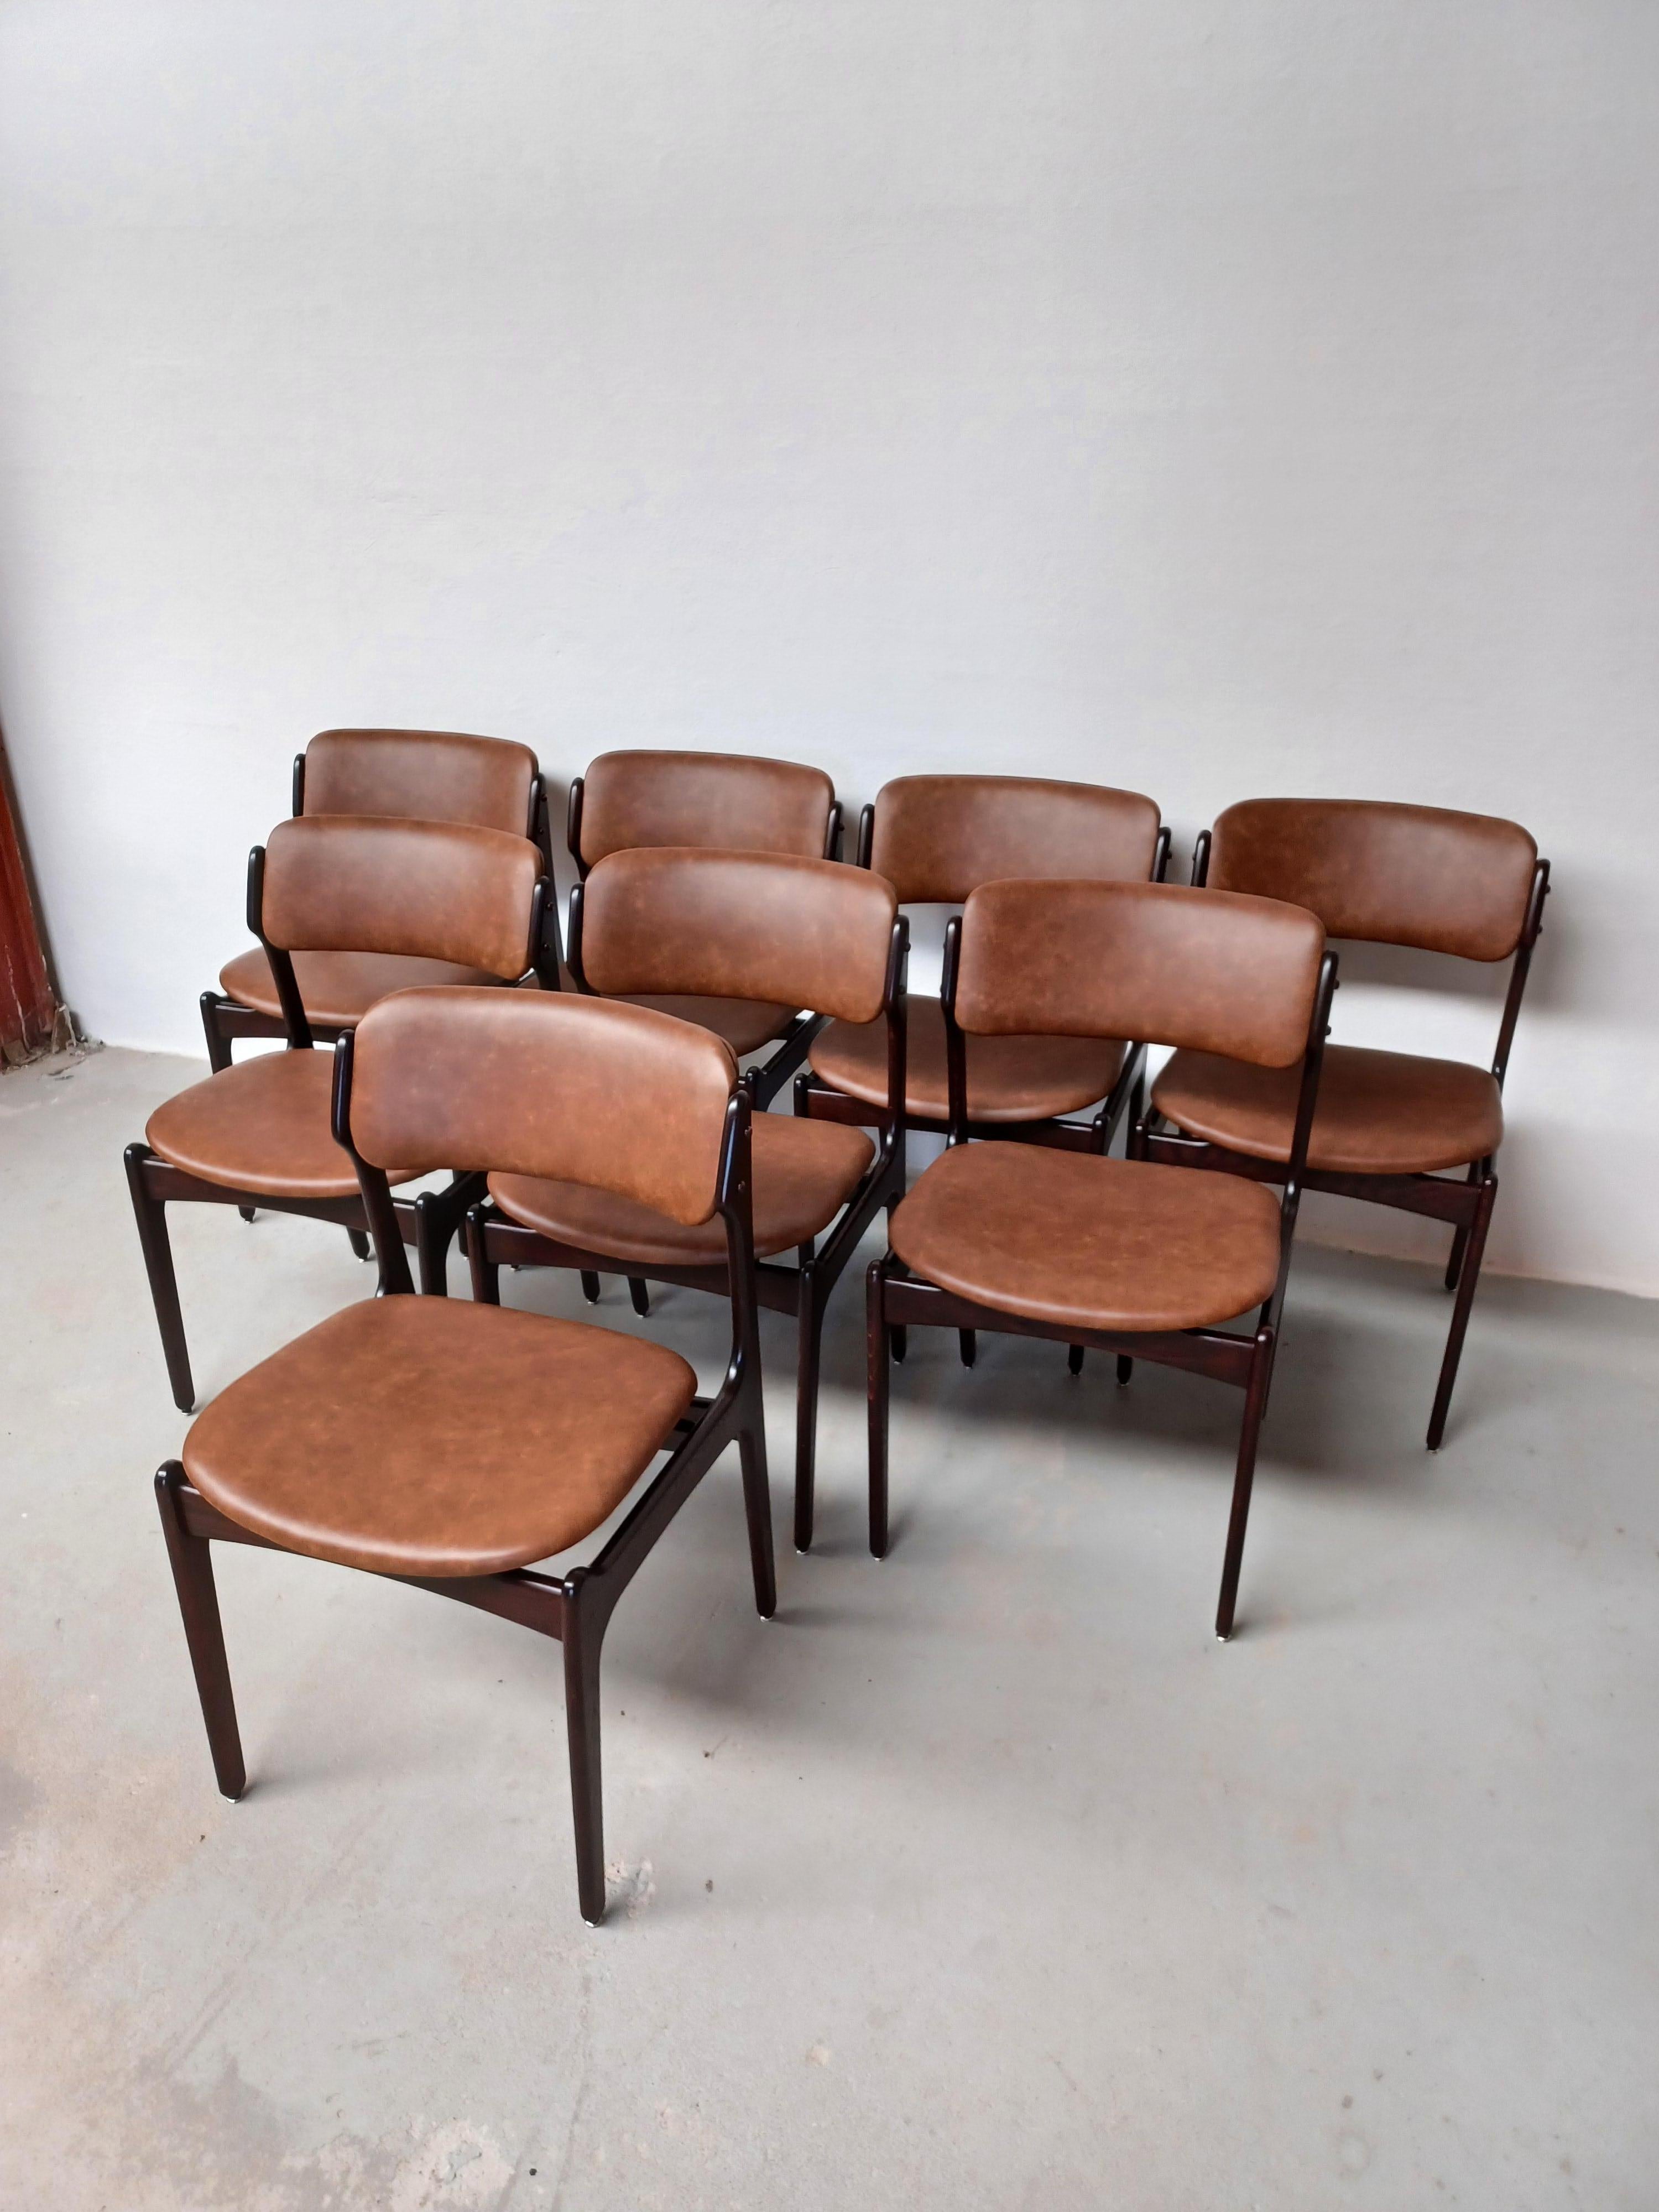 Set of eight fully restored and refinished dining chairs in tanned oak with floating seats designed by Erik Buch for Oddense Maskinsnedkeri, 1960s

The chairs have a simple appealing construction that is becoming increasingly collectable and gives a